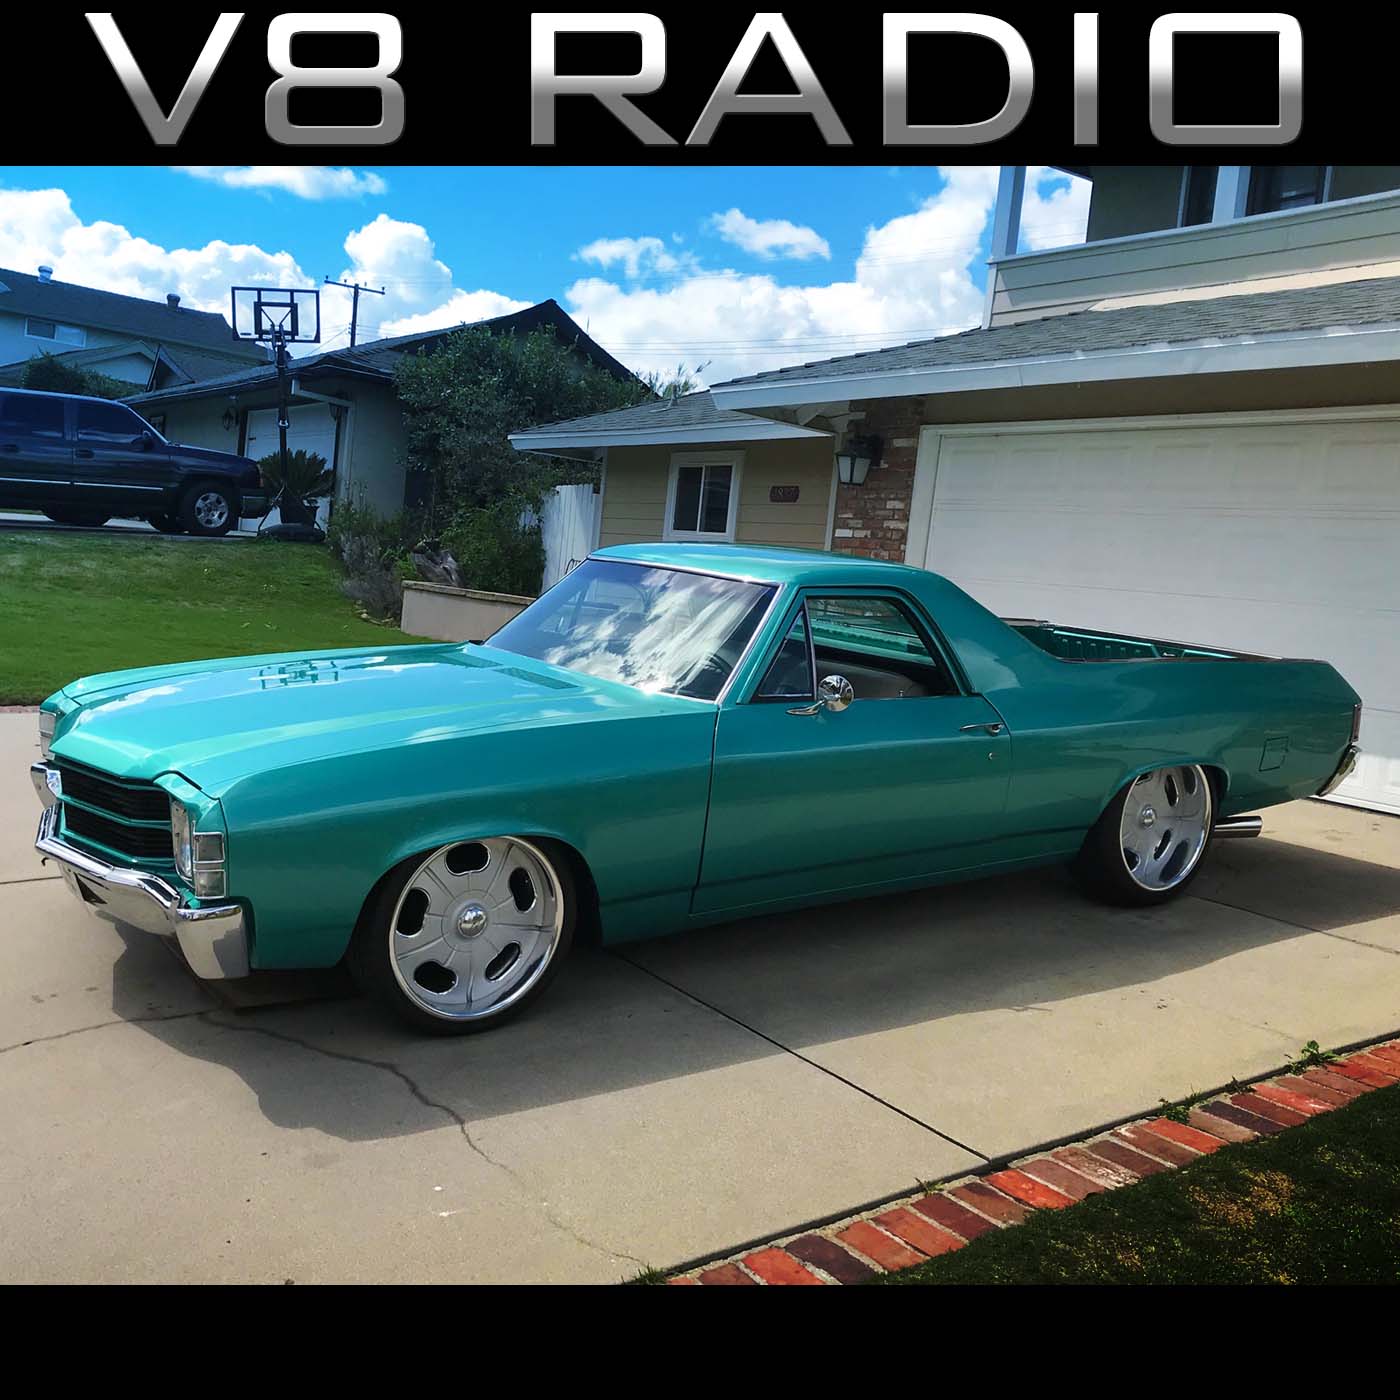 Special Guest Ross Berlanga and the TMI Trim Awards on the V8 Radio Podcast